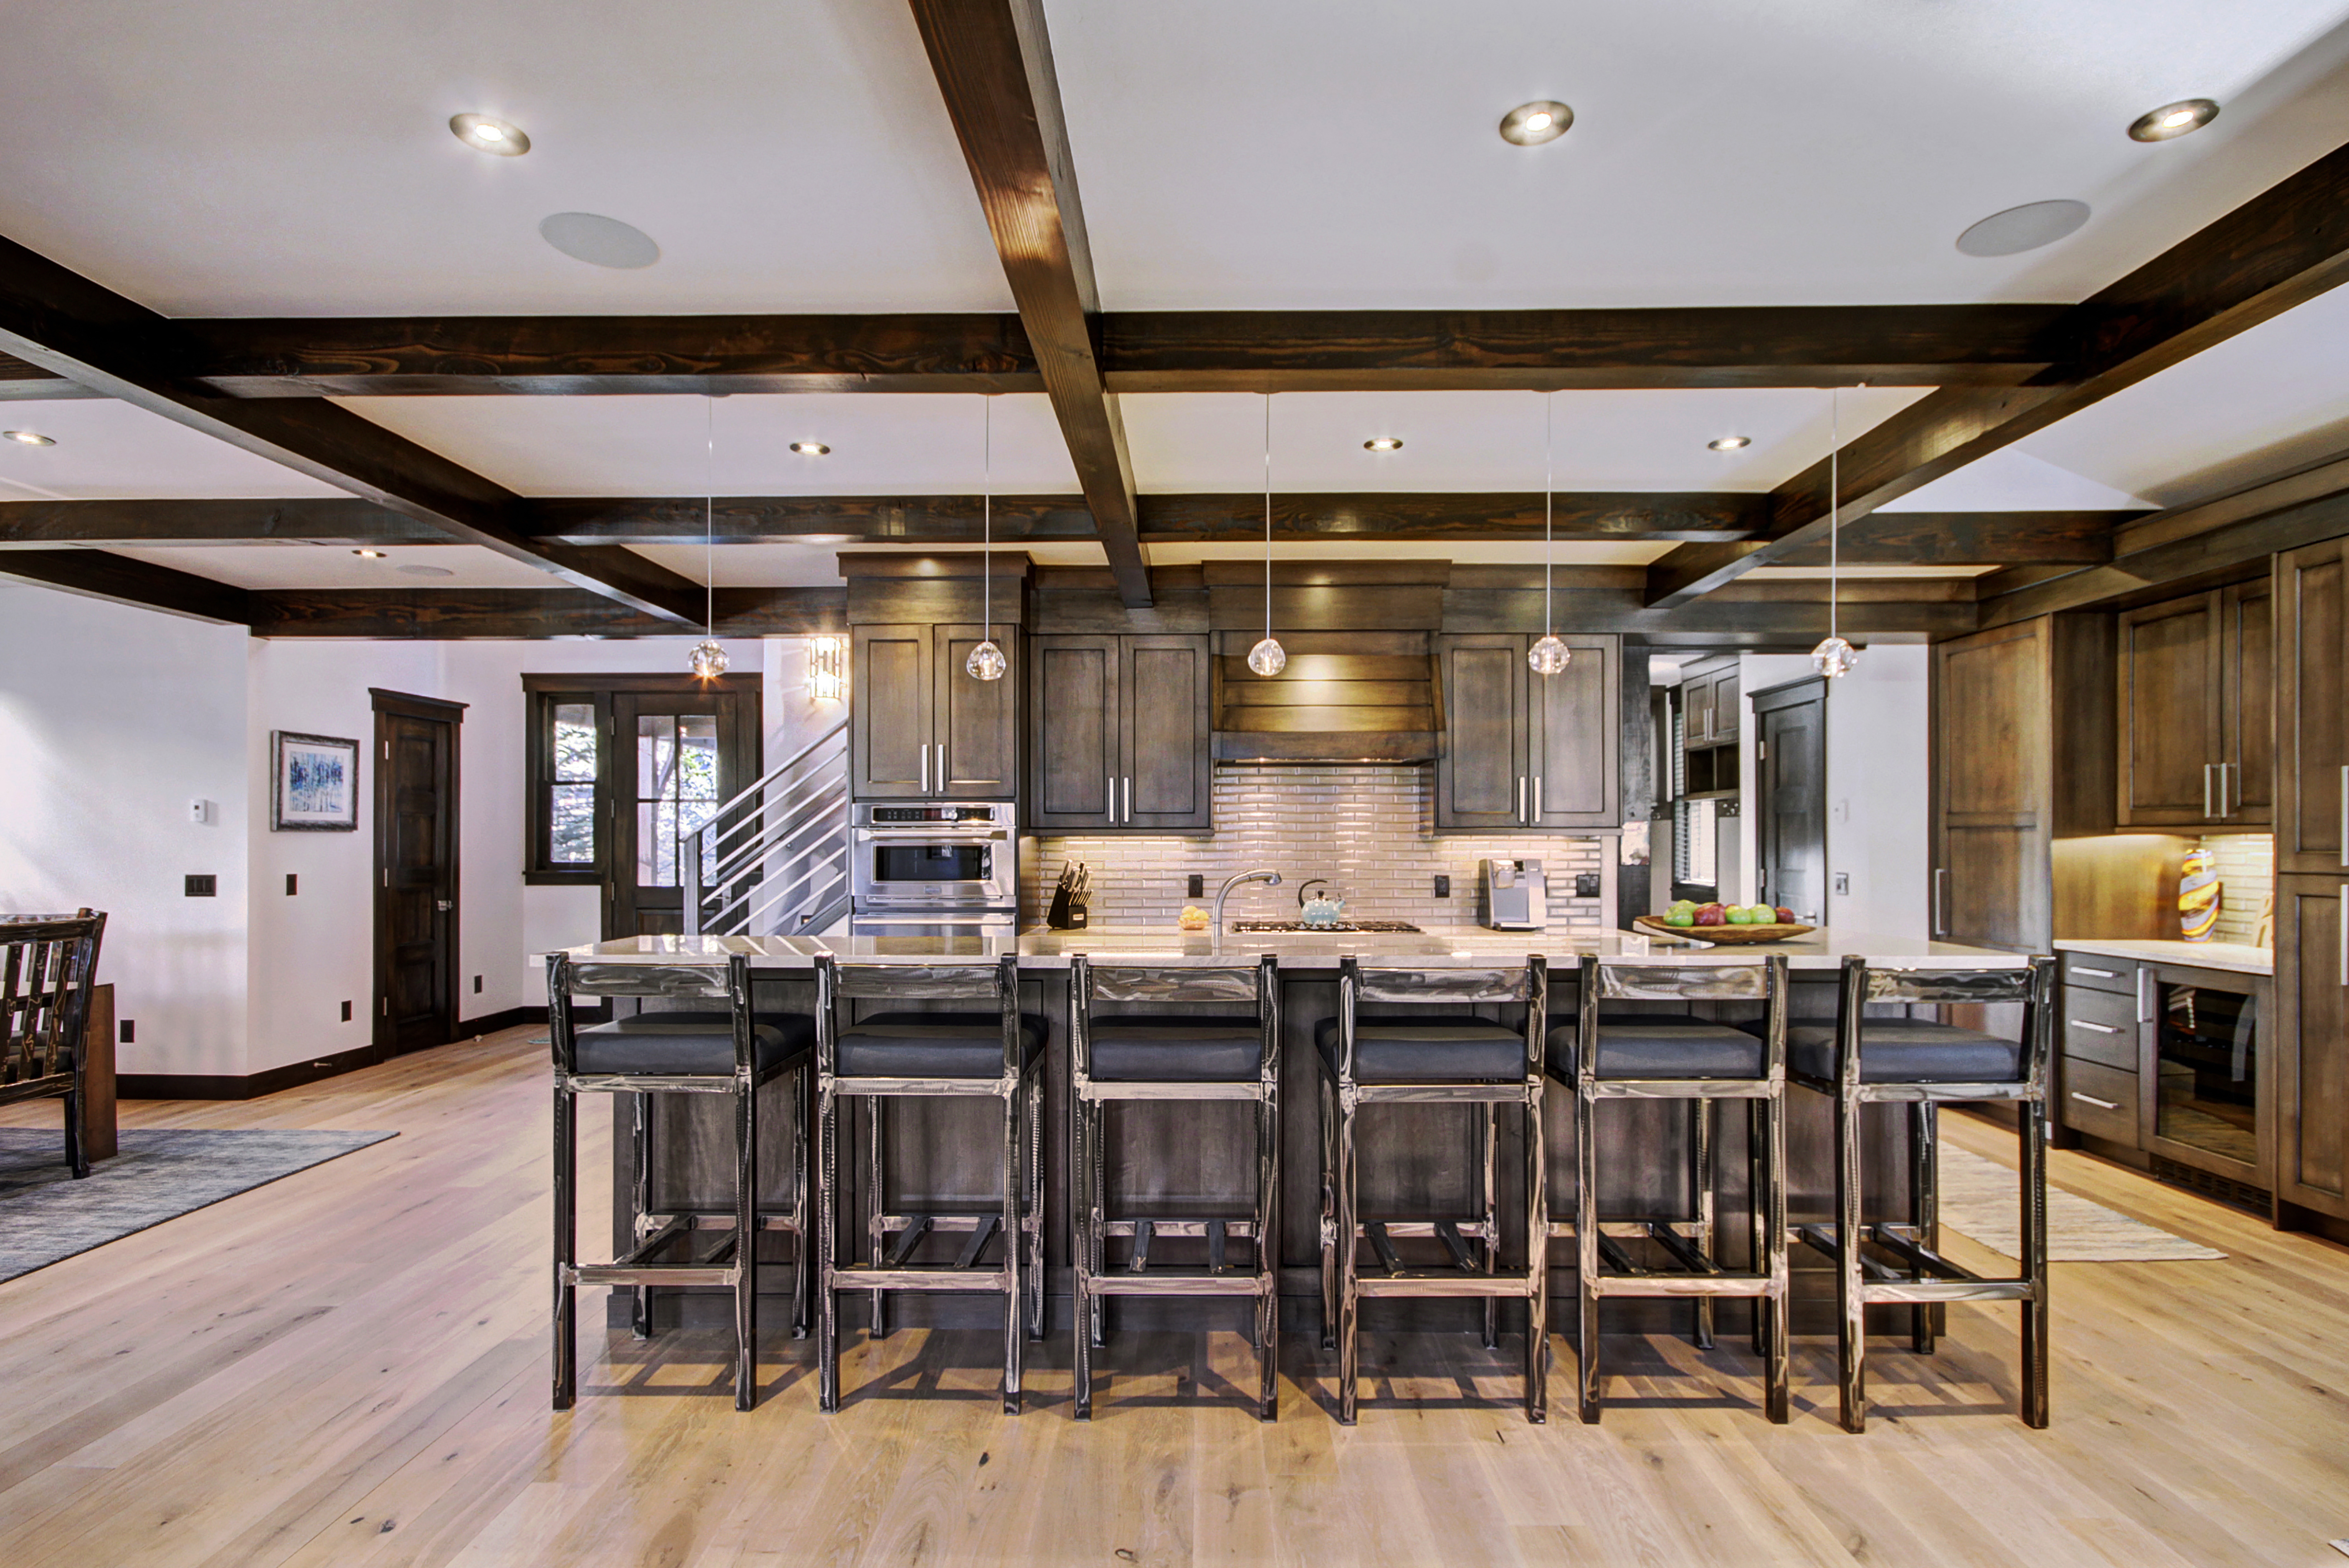 Cooks will love this kitchen with its stainless appliances and high-end finishes -  The Bogart House Breckenridge Vacation Rental